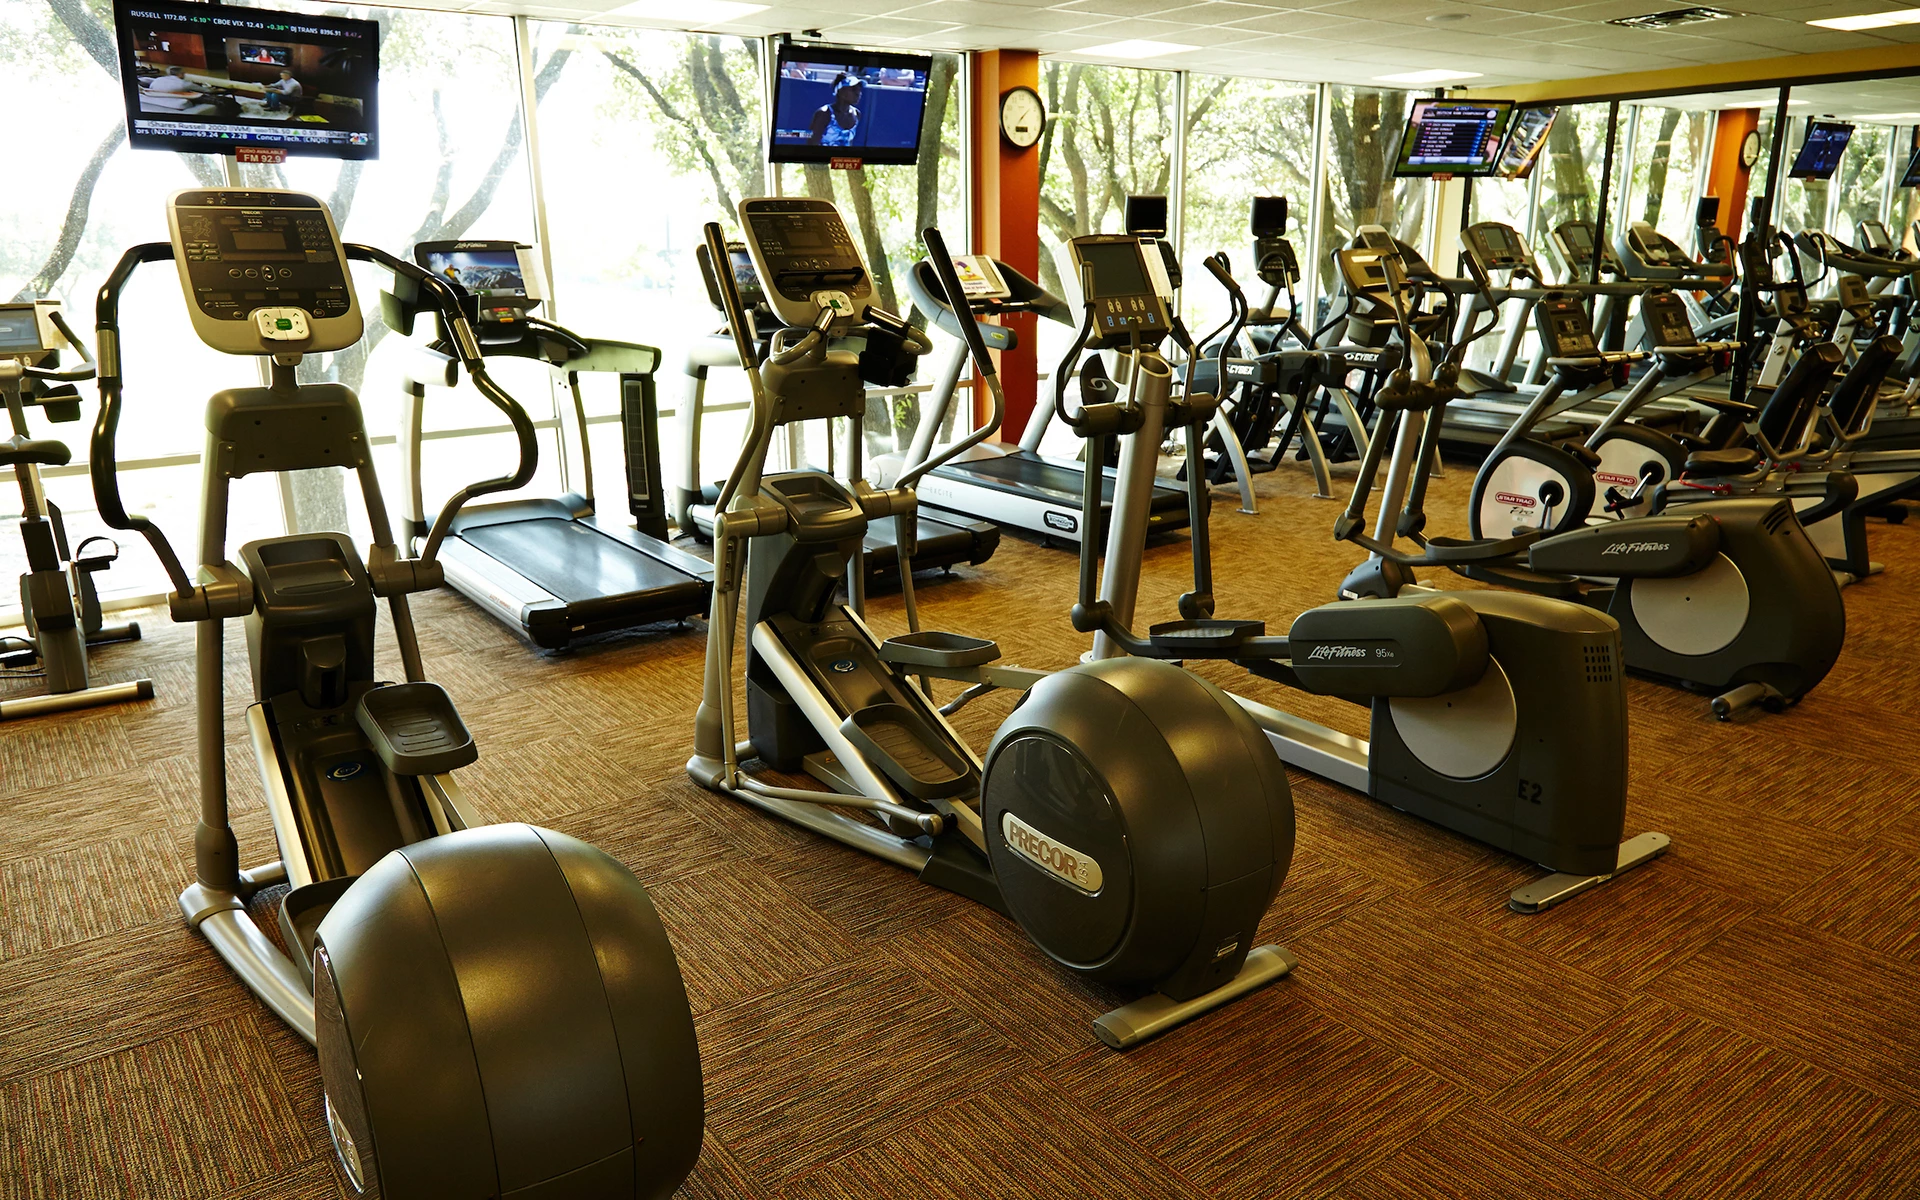 Fitness center adds new hours, staff – The Brookhaven Courier